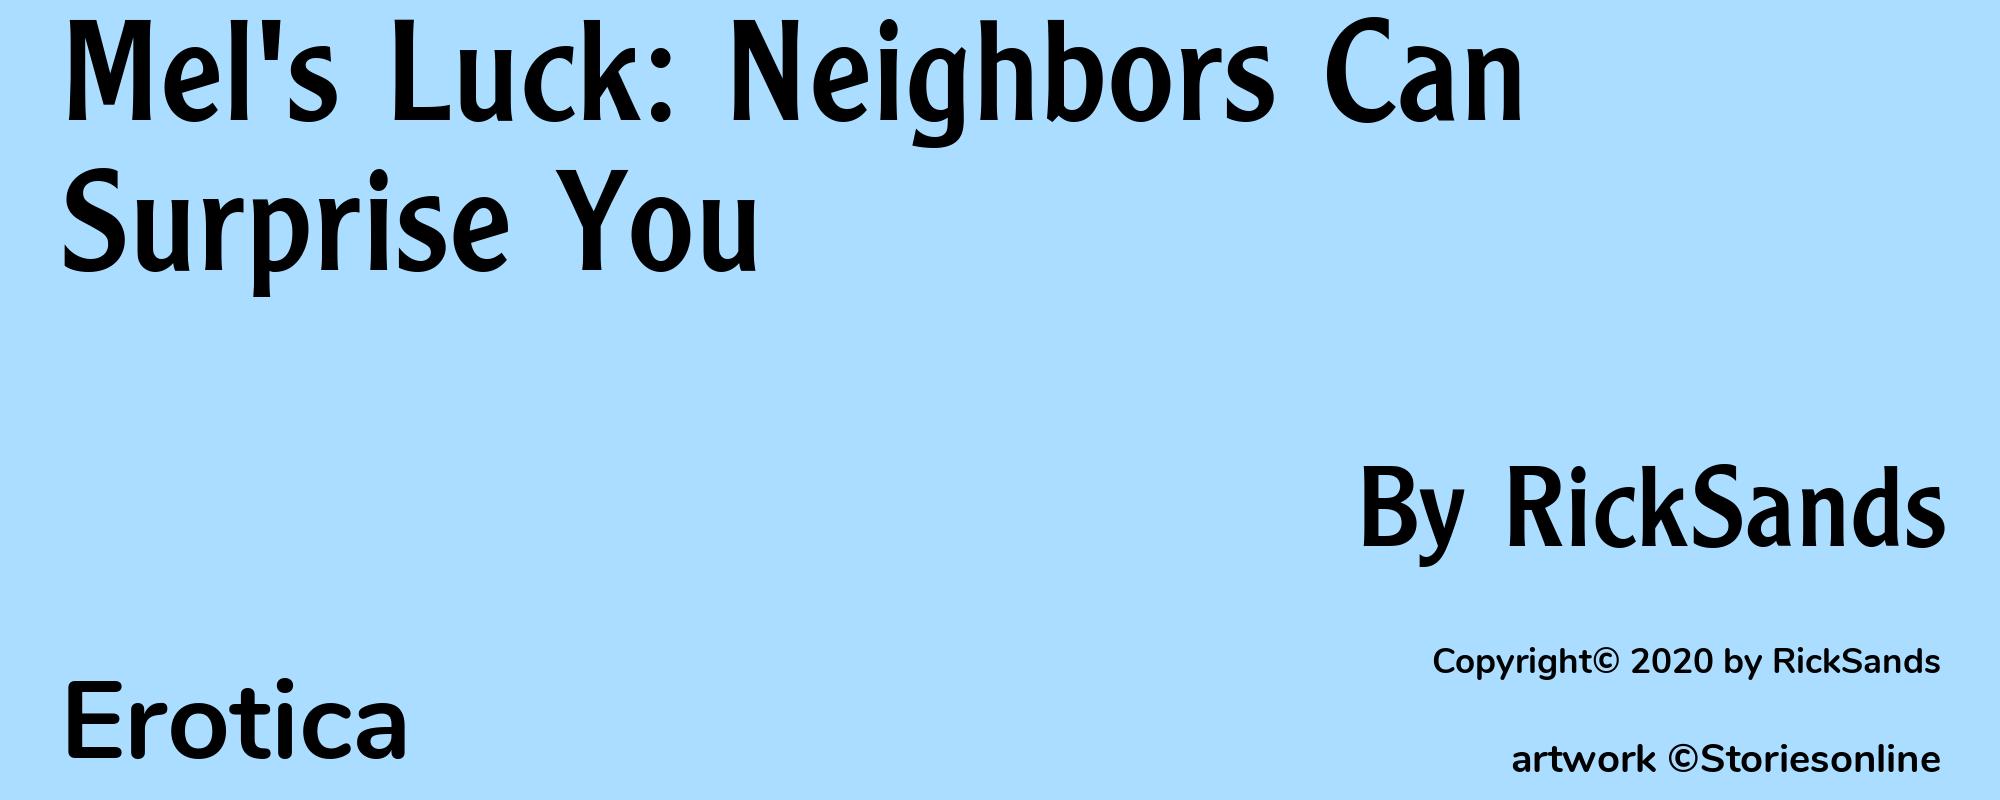 Mel's Luck: Neighbors Can Surprise You - Cover